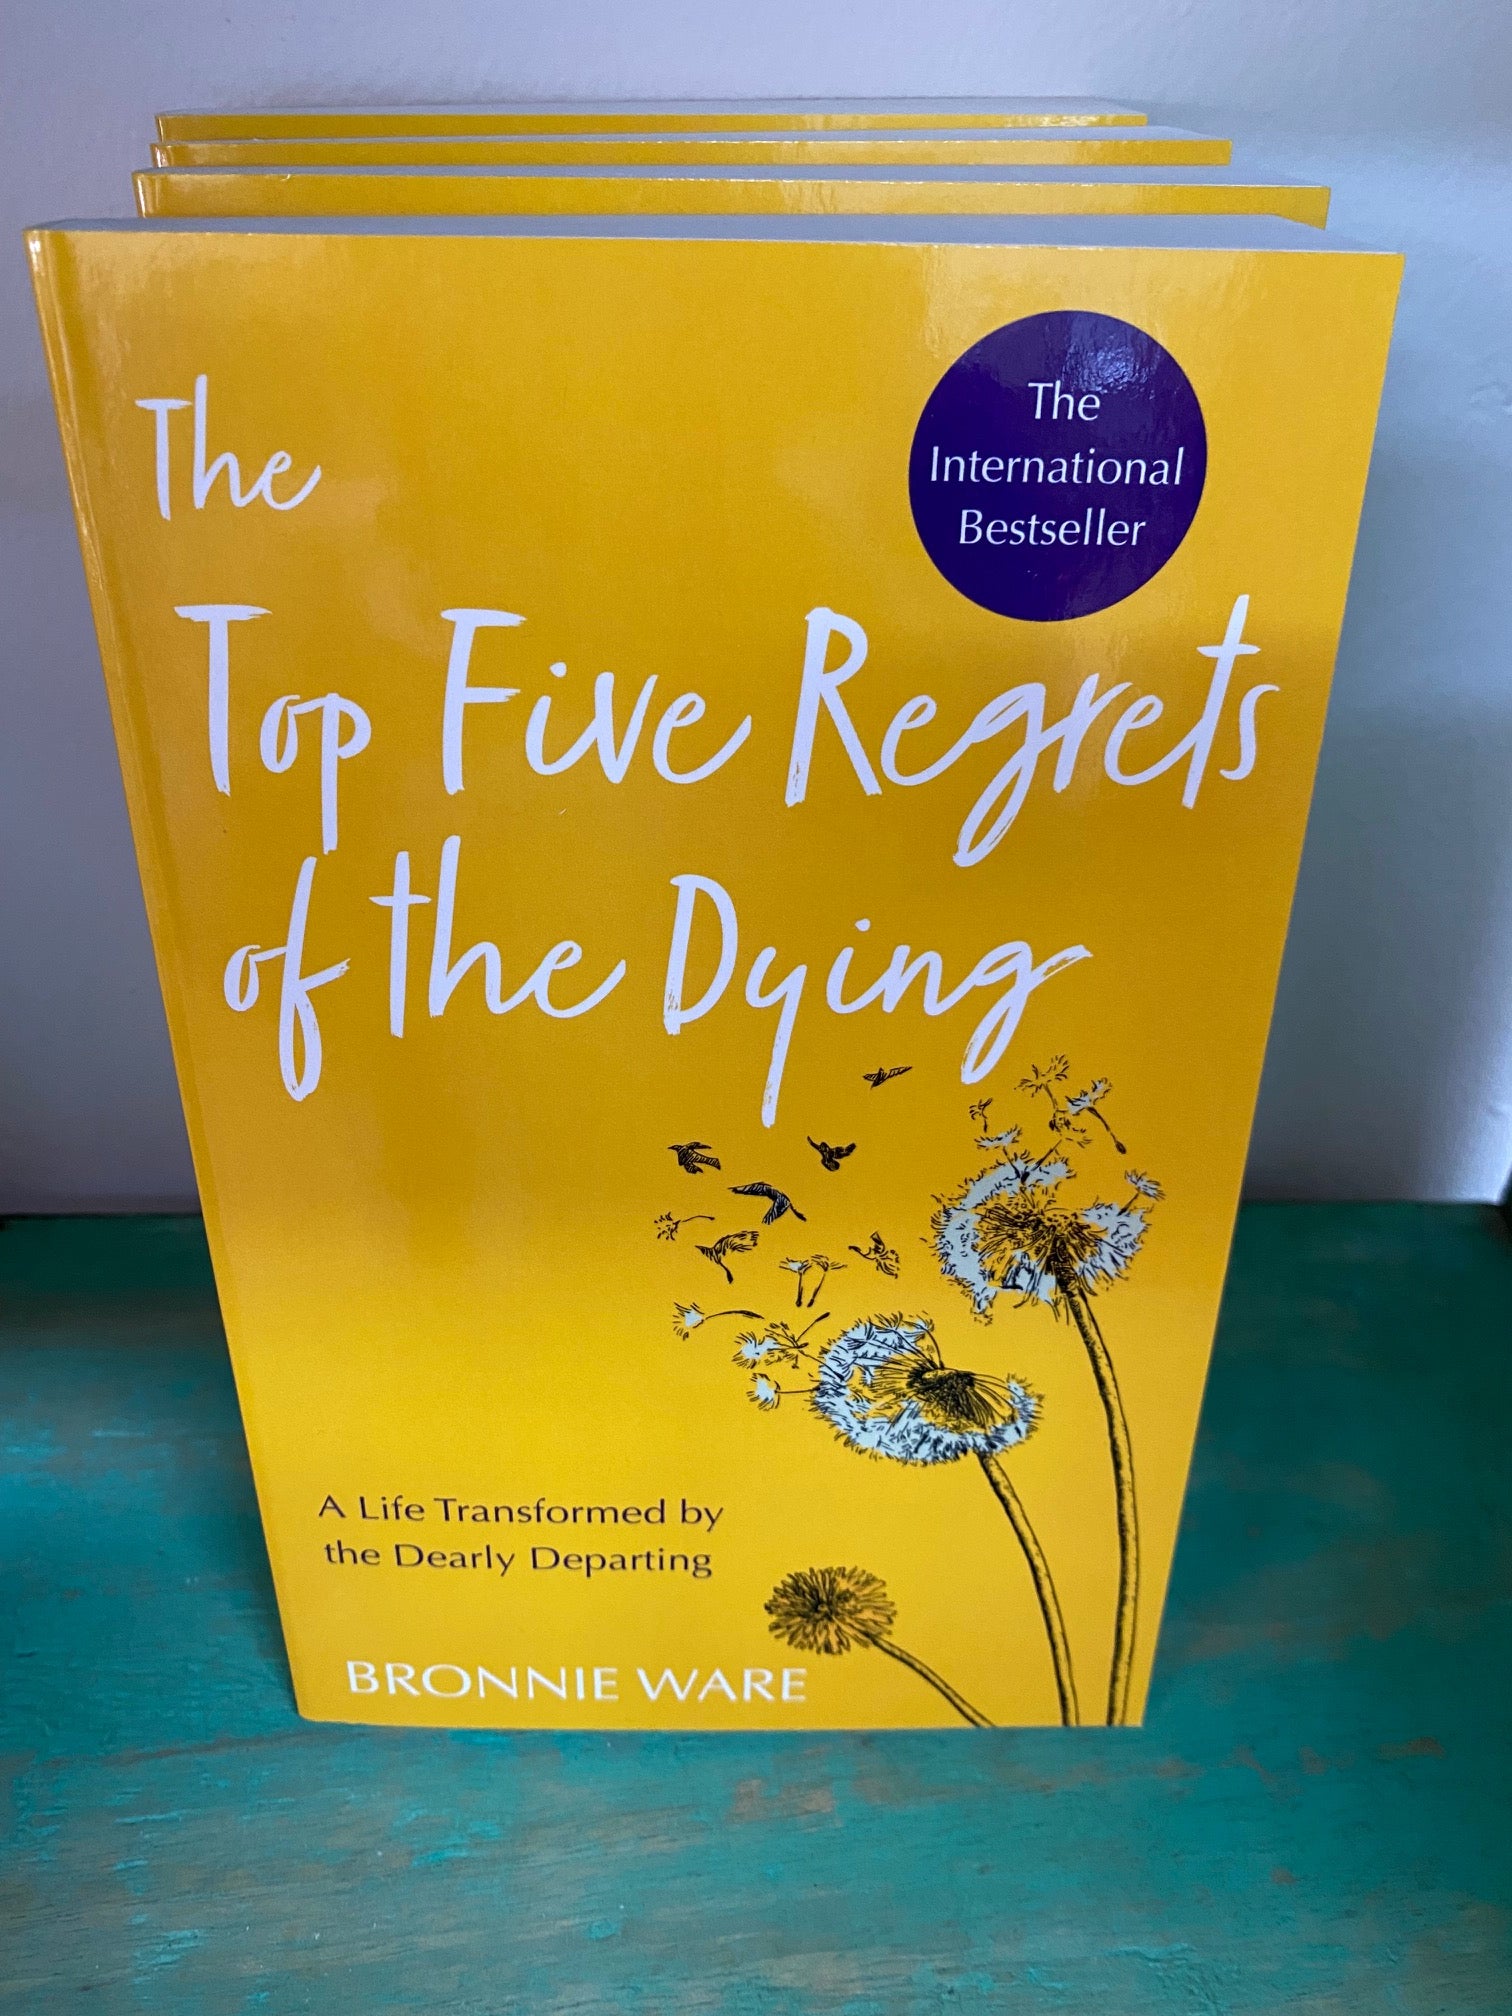 købe Microbe Borger Top 5 Regrets of the Dying by Bronnie Ware – Seasons of New England